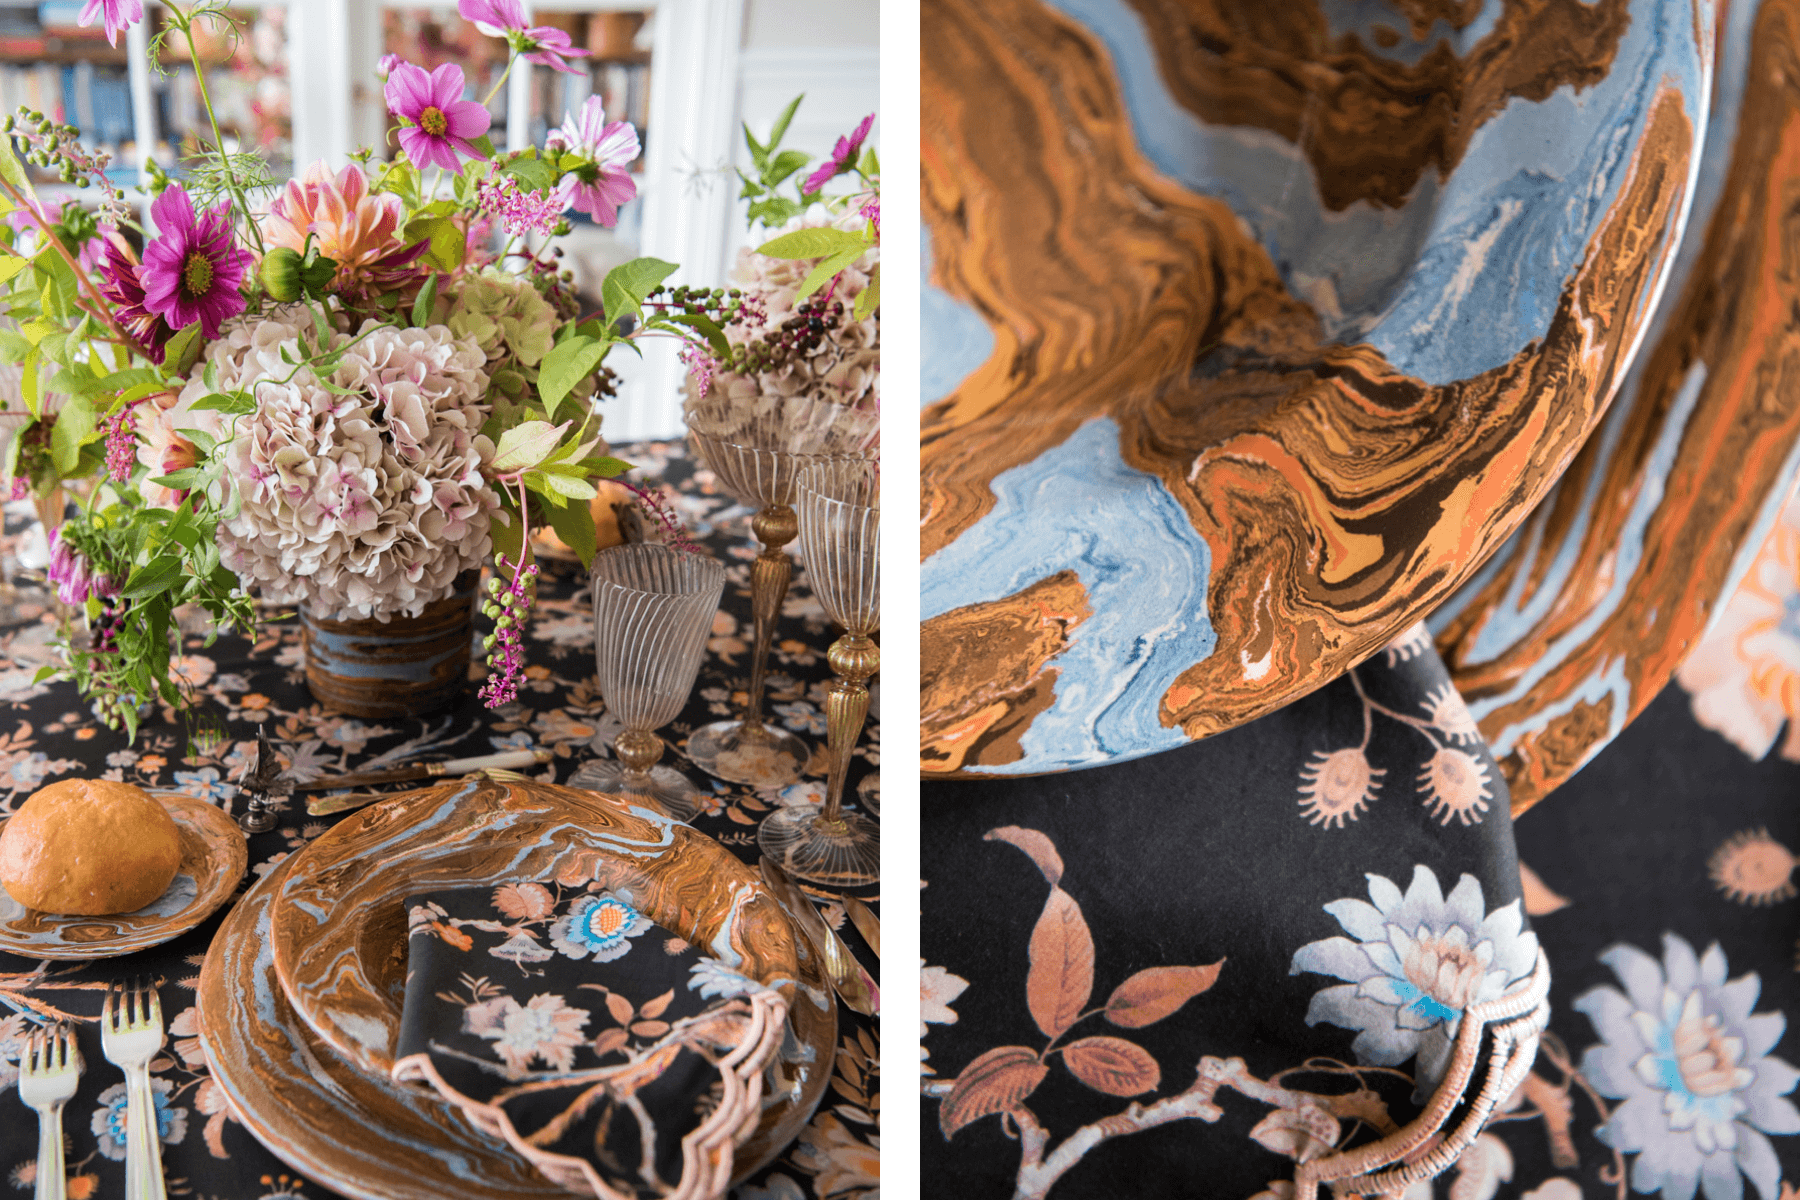 Left: Dinner table set with black floral tablecloth, marbled plates, and purple flower arrangement. Right: Same dinner table but cropped image of marbled plates. 